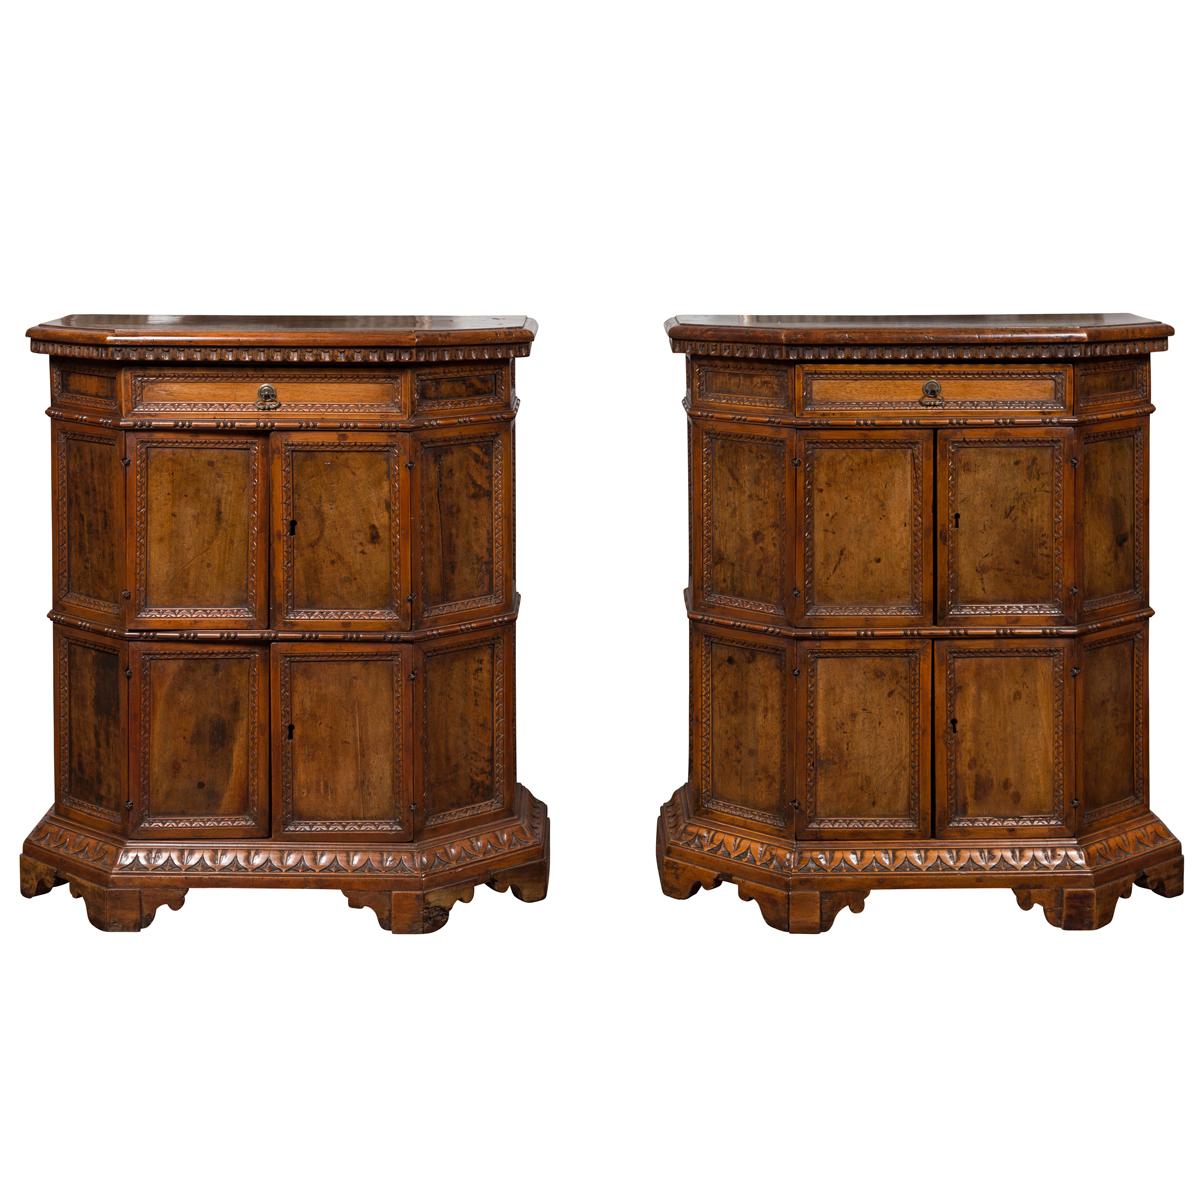 Pair of 1800s Italian Carved Walnut Cabinets with Canted Sides, Drawer and Doors